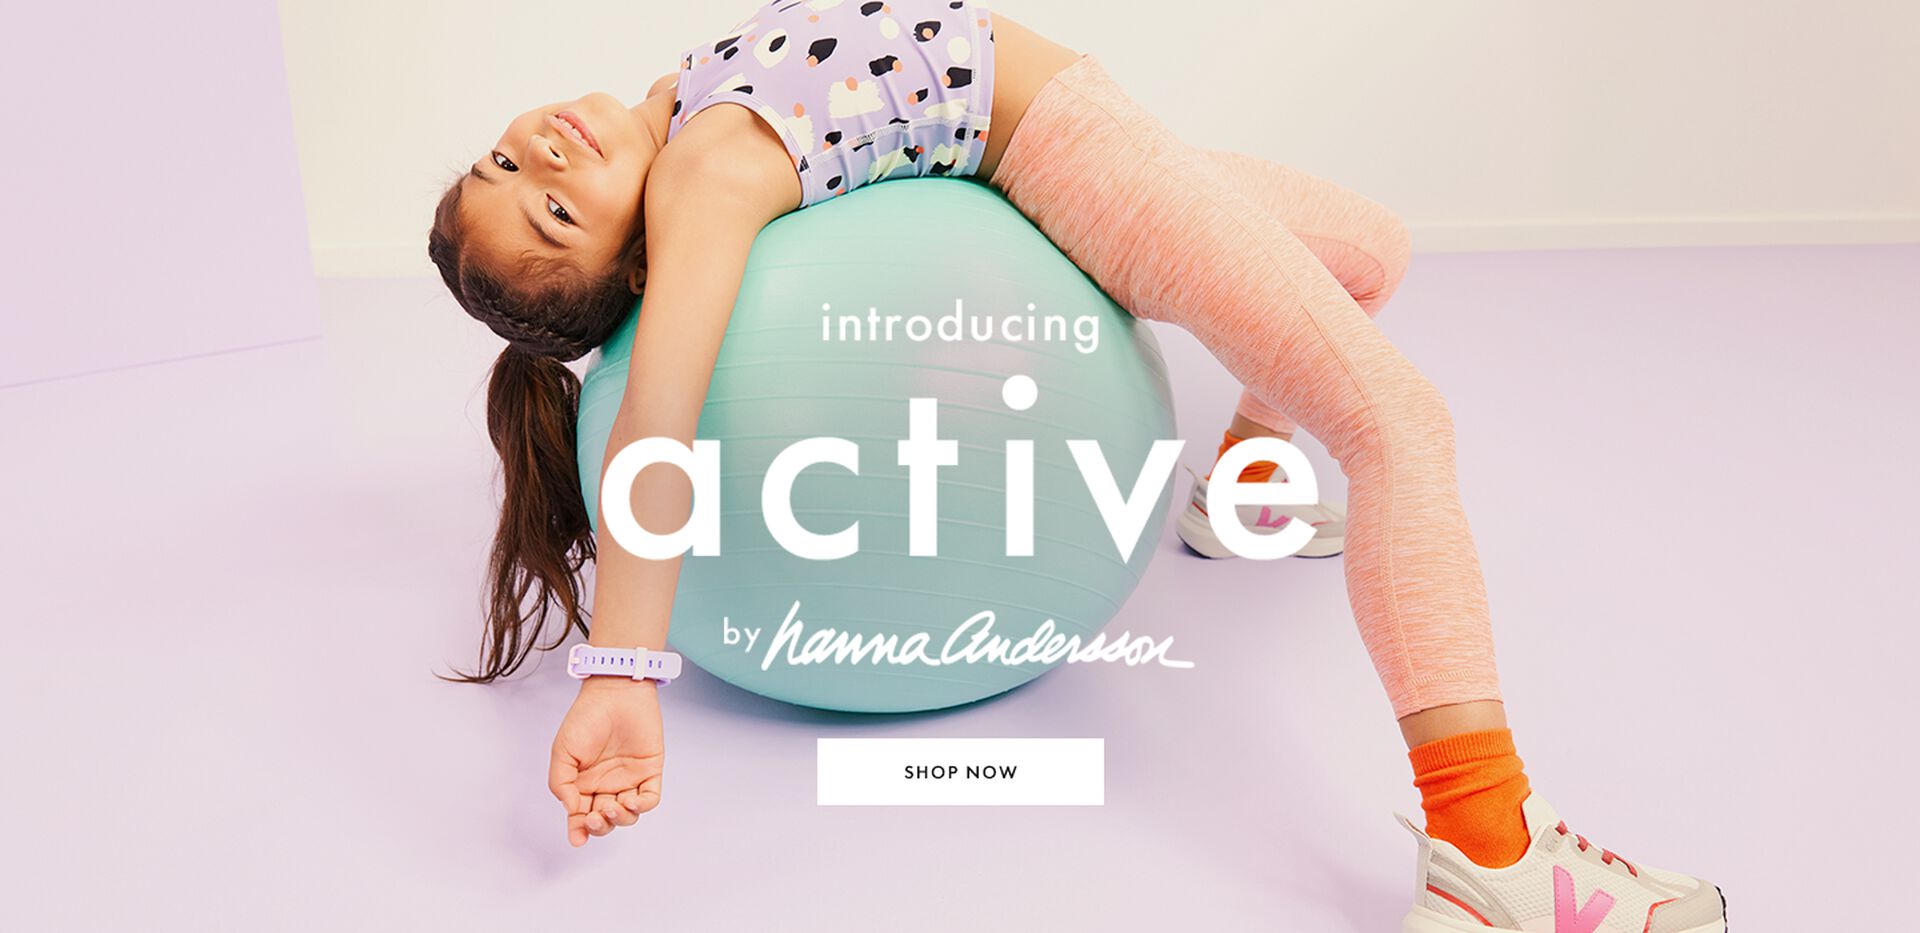 Introducing Active by Hanna Andersson